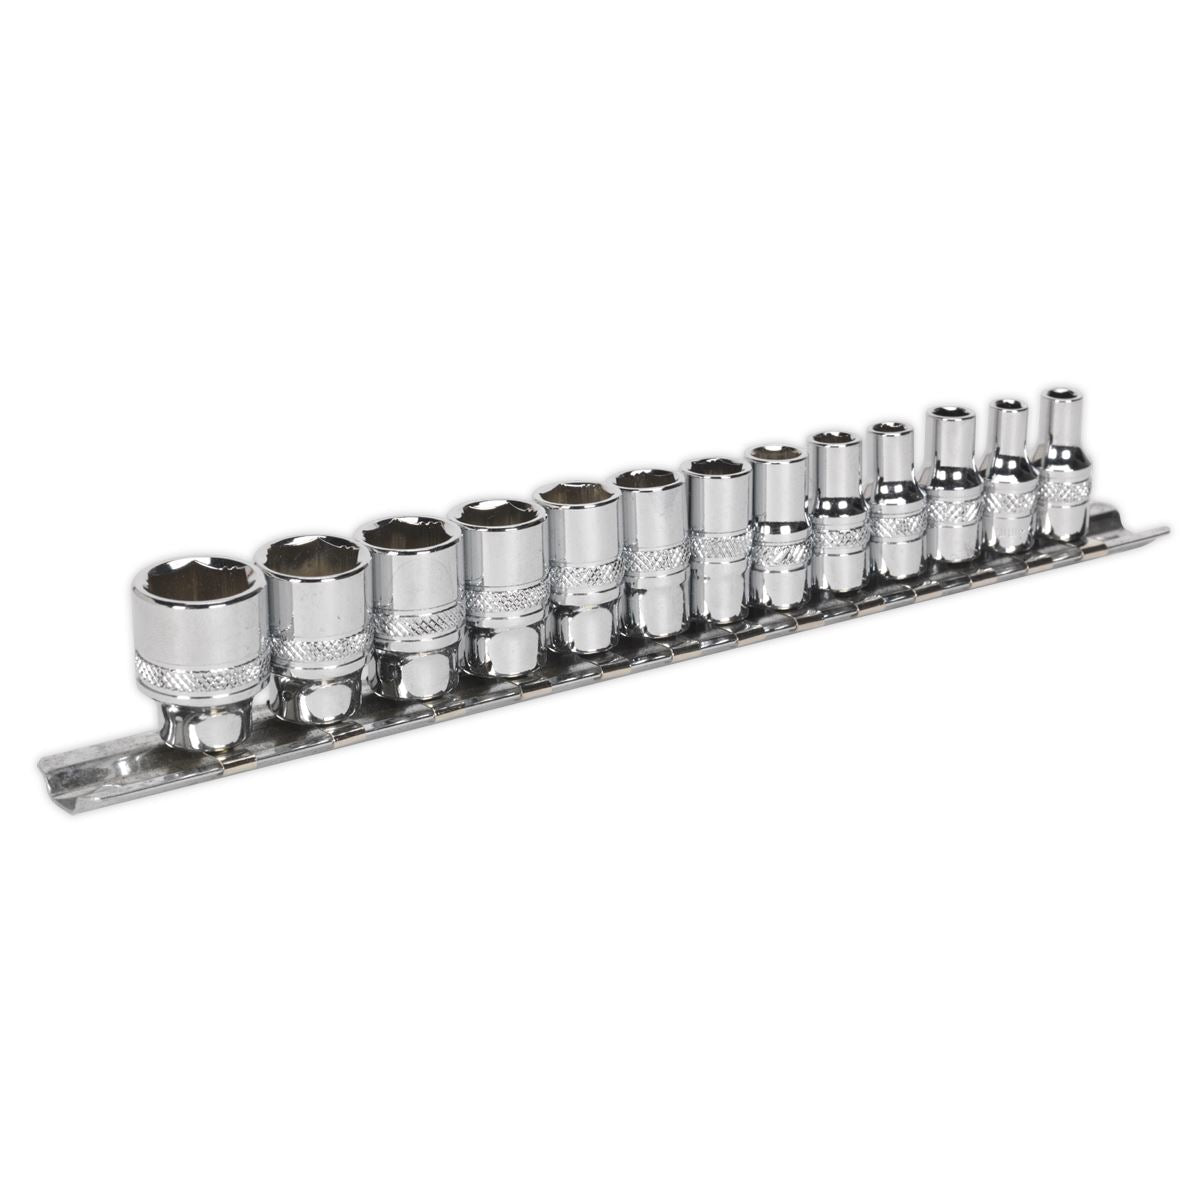 Sealey Socket Set Lock-On 1/4" Drive Metric 4-14mm Premier 13 Piece Rounded Nuts